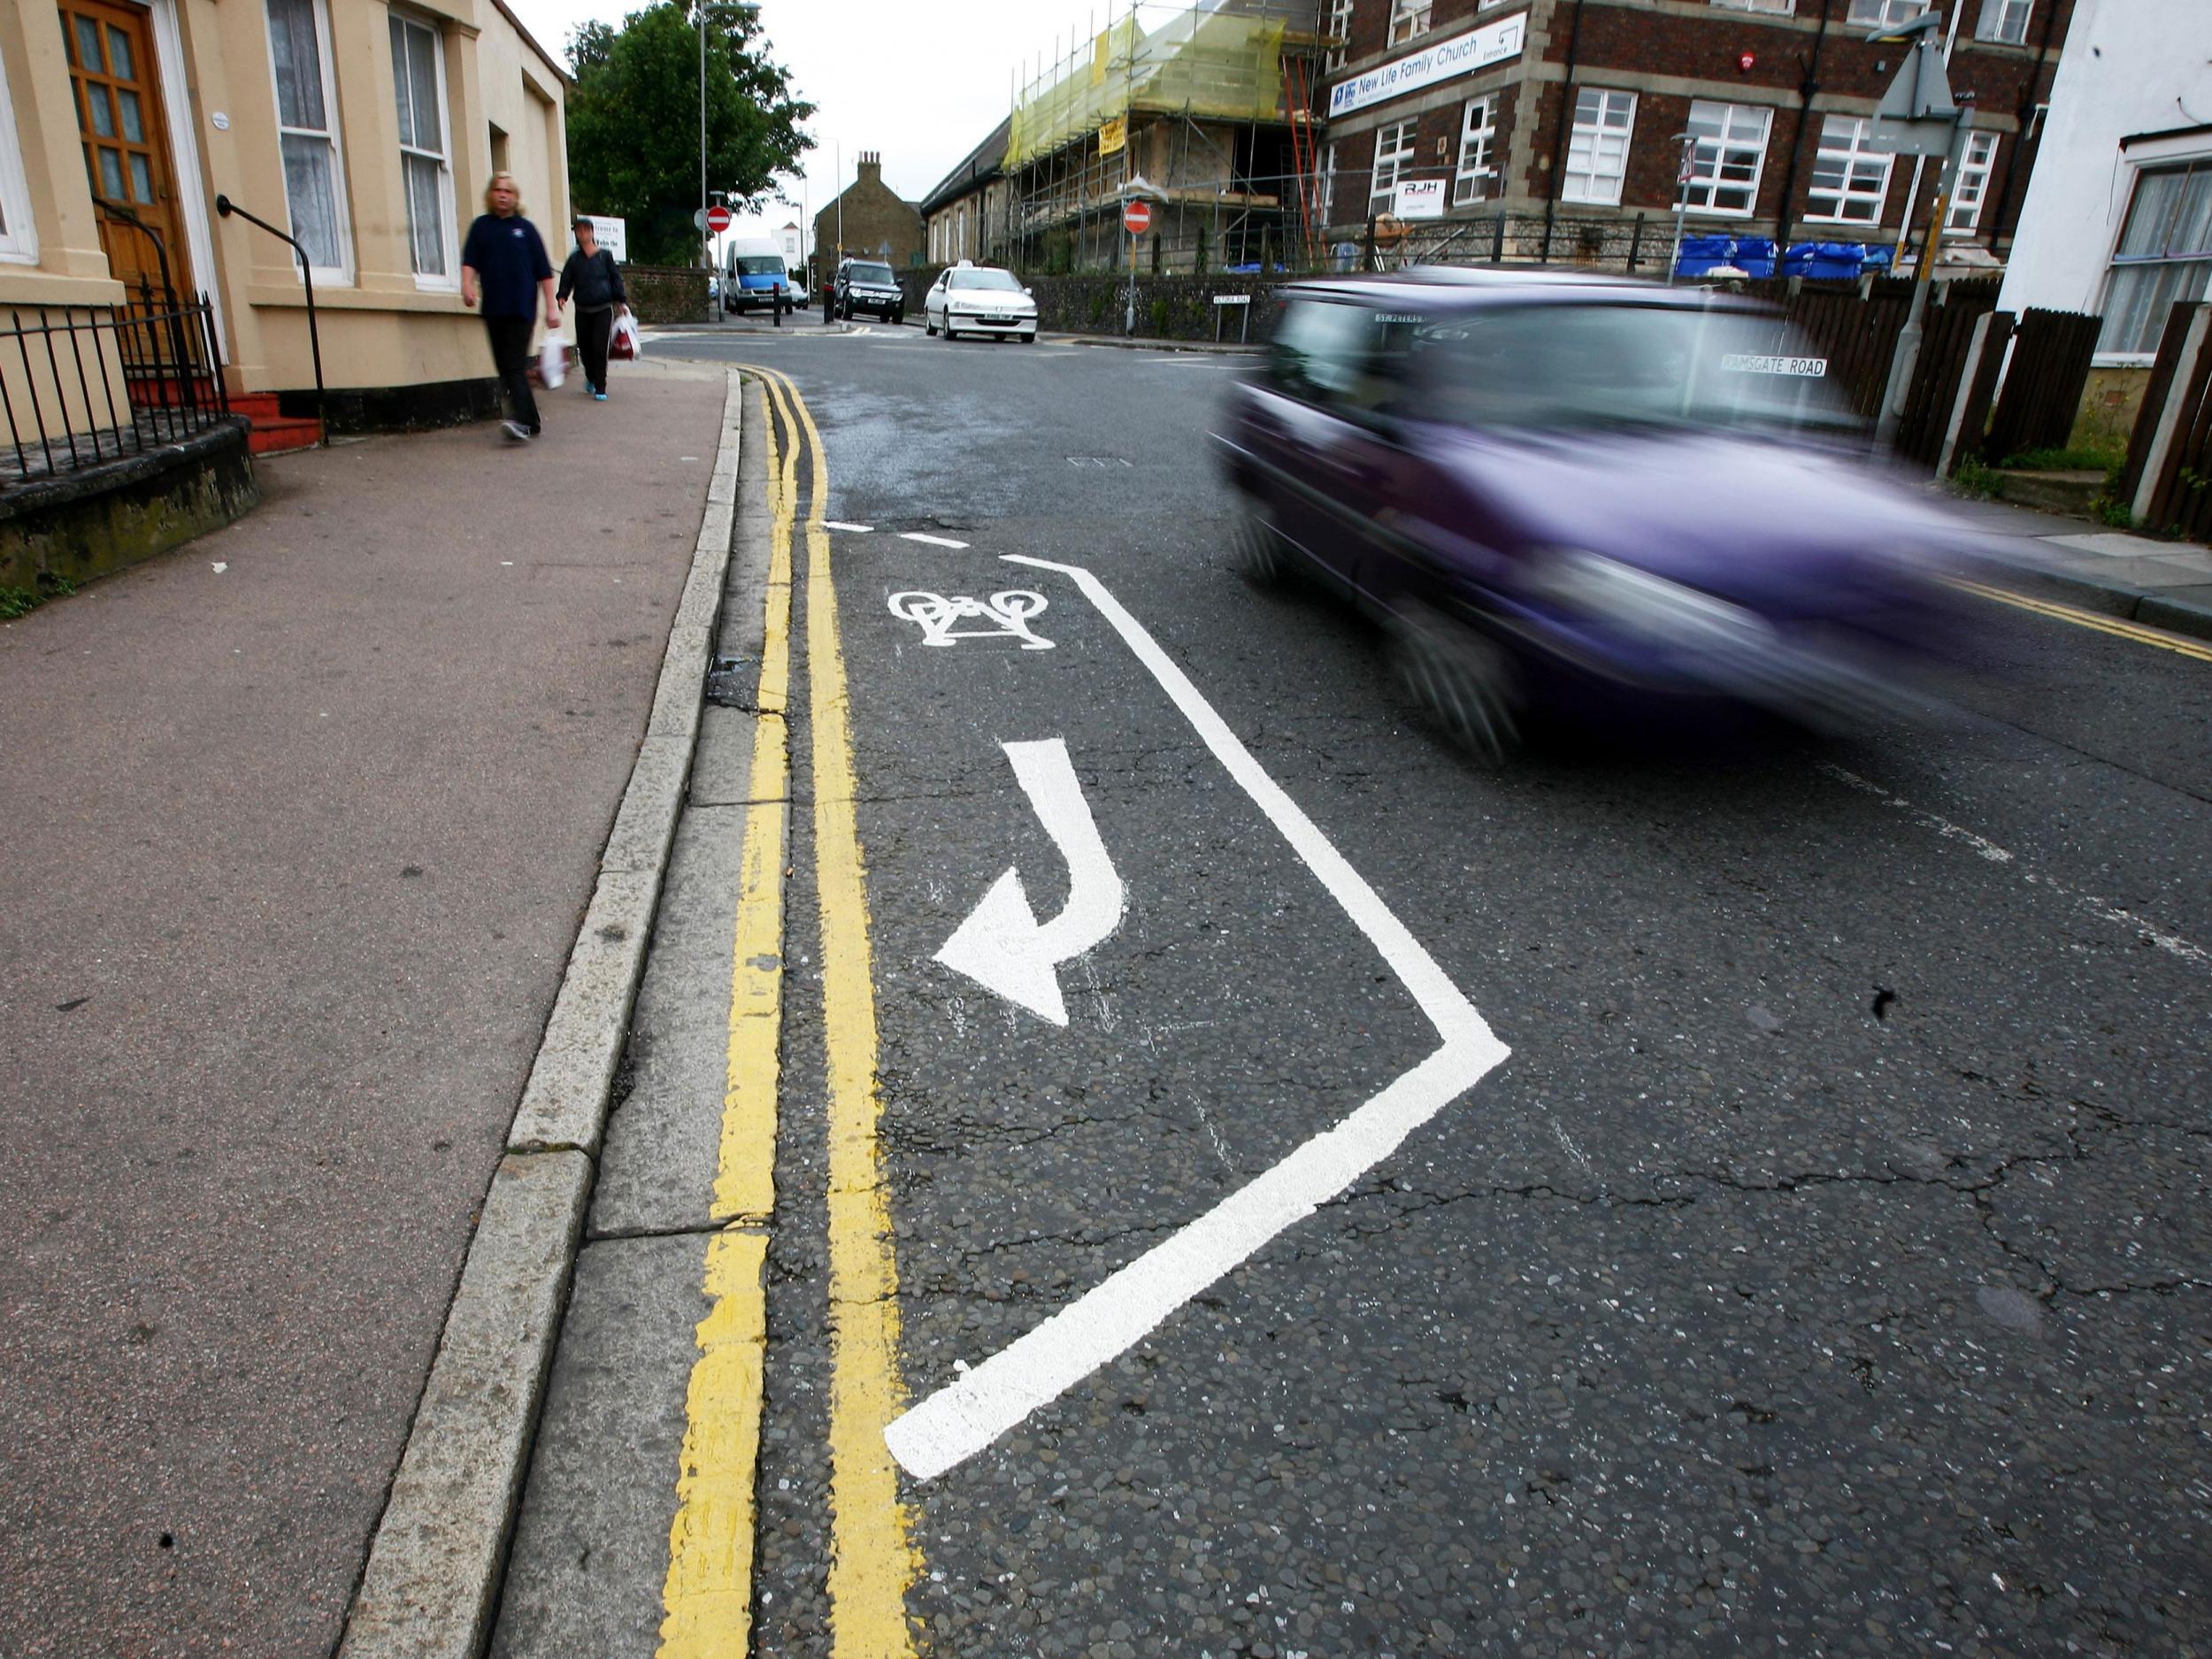 Far too many of Britain's cycle lanes are ineffectual strips of white paint, the cycling commissioners argue